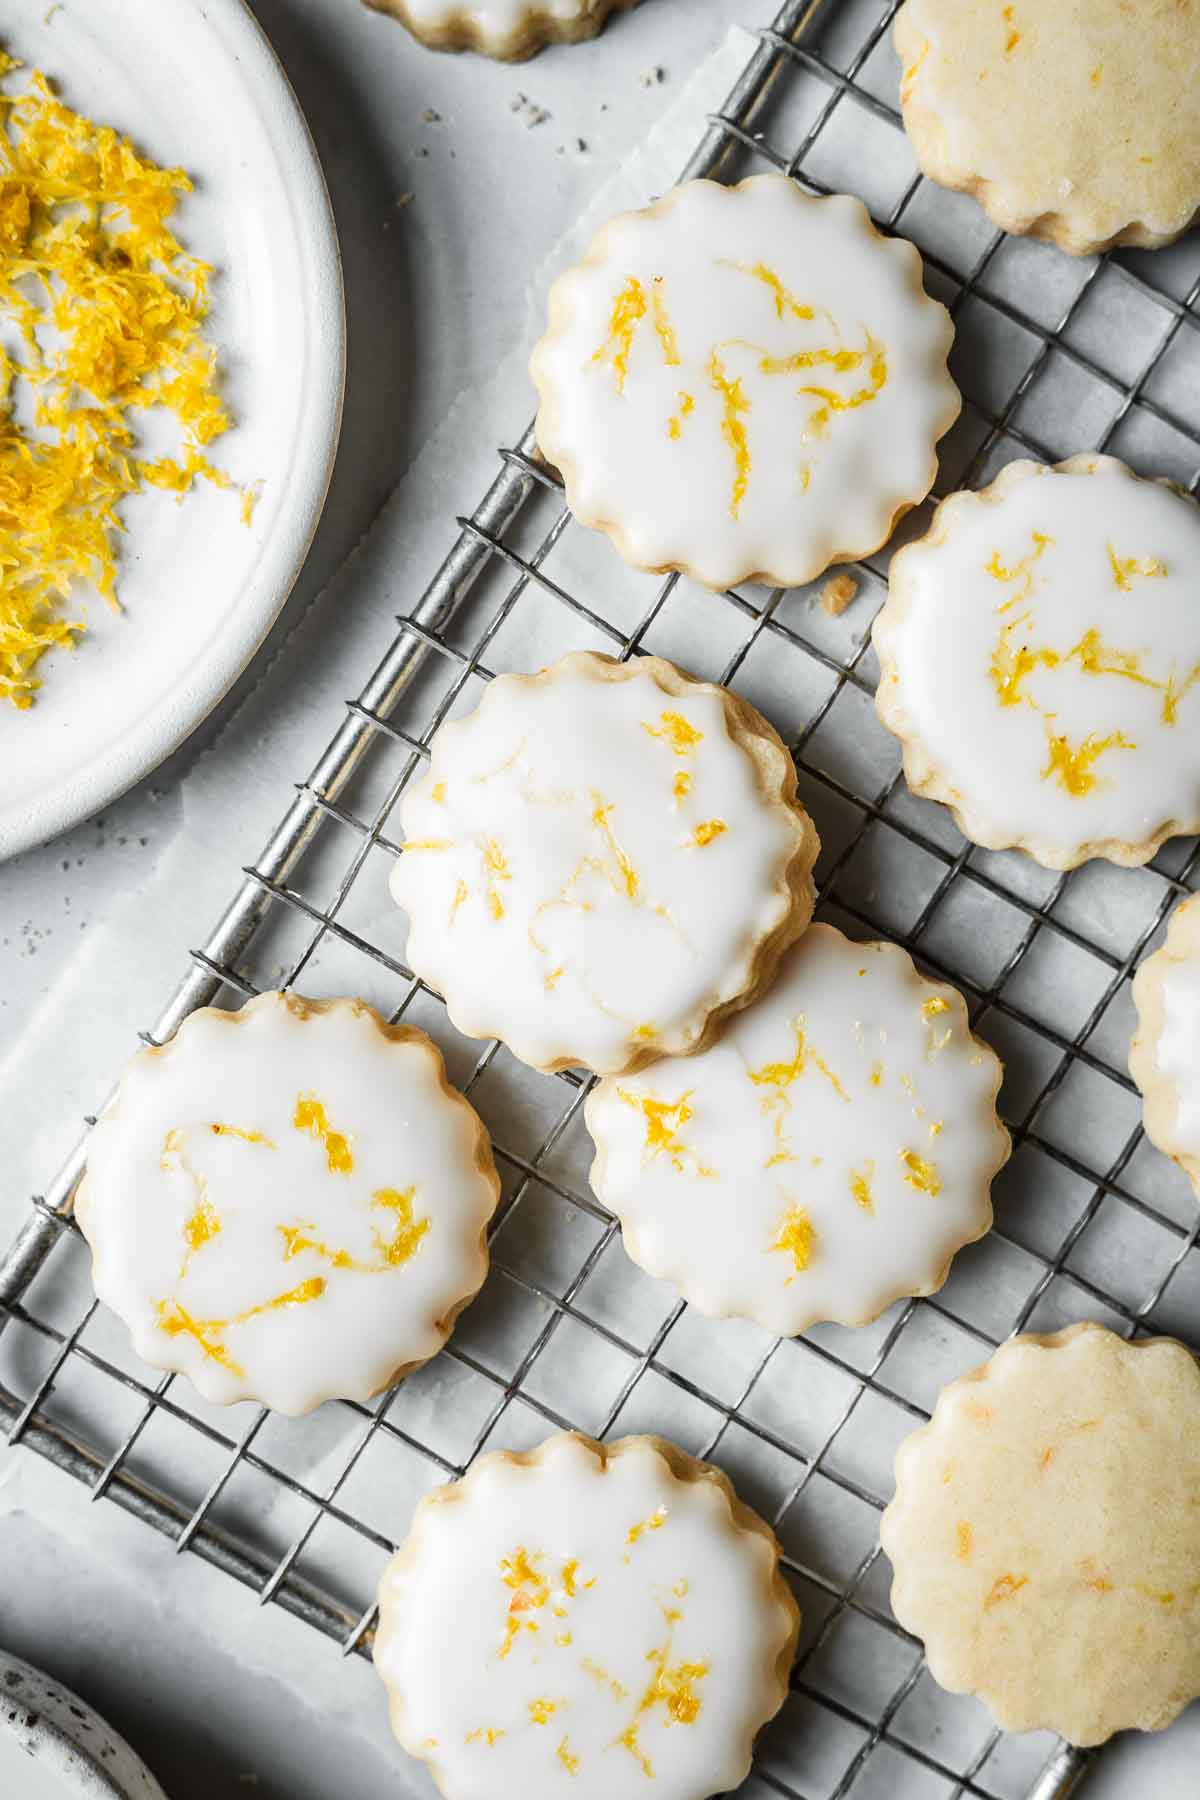 Glazed cookies with lemon zest on a cooling rack.